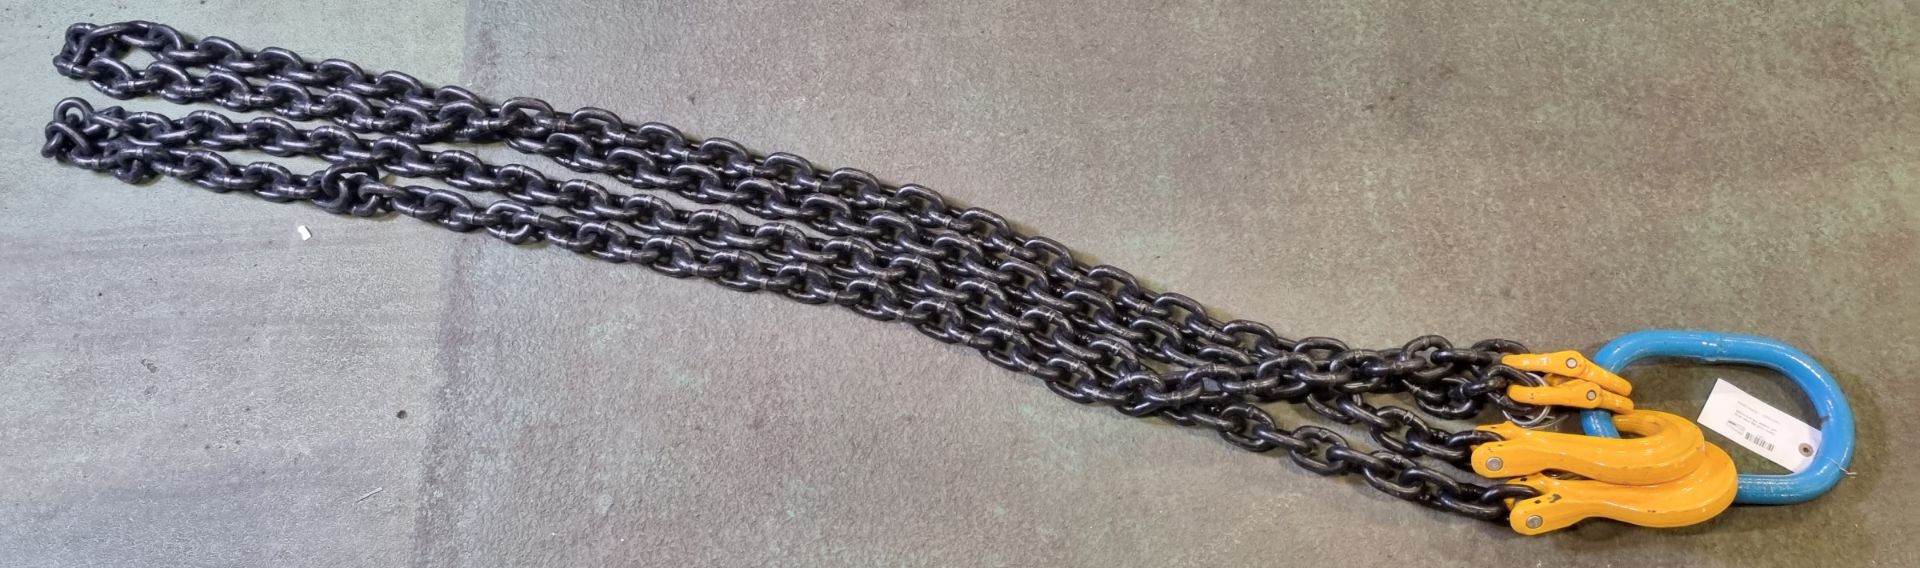 13mm multi leg chain sling with master link and hooks - Image 3 of 3